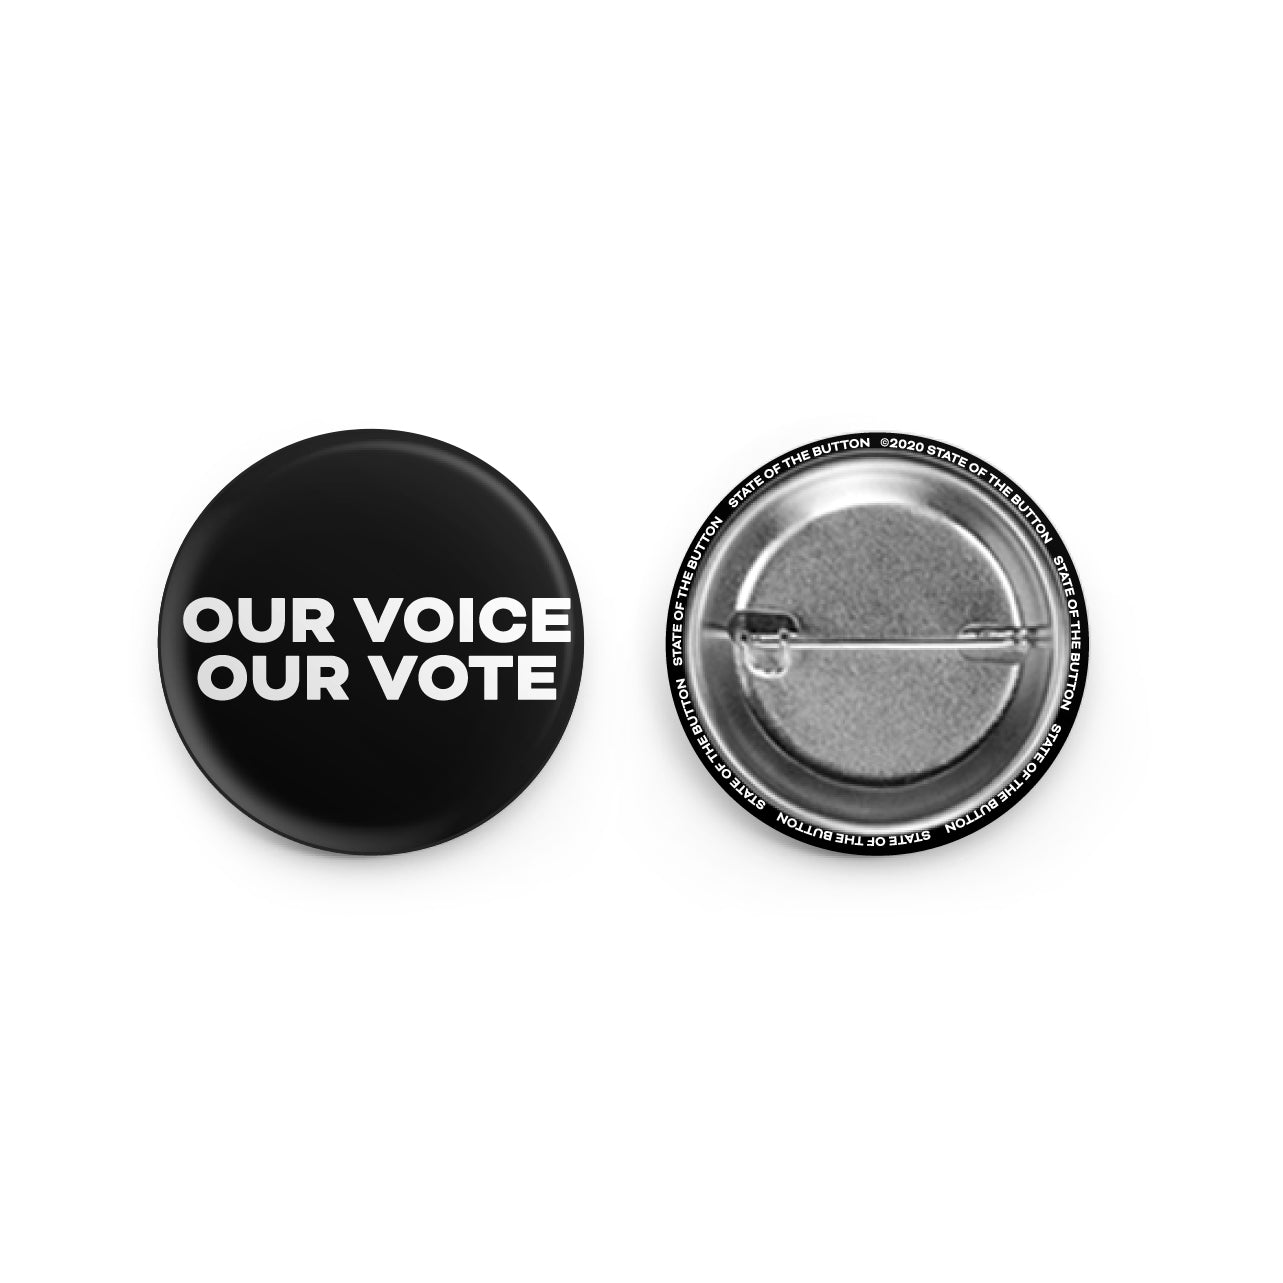 OUR VOICE OUR VOTE Buttons